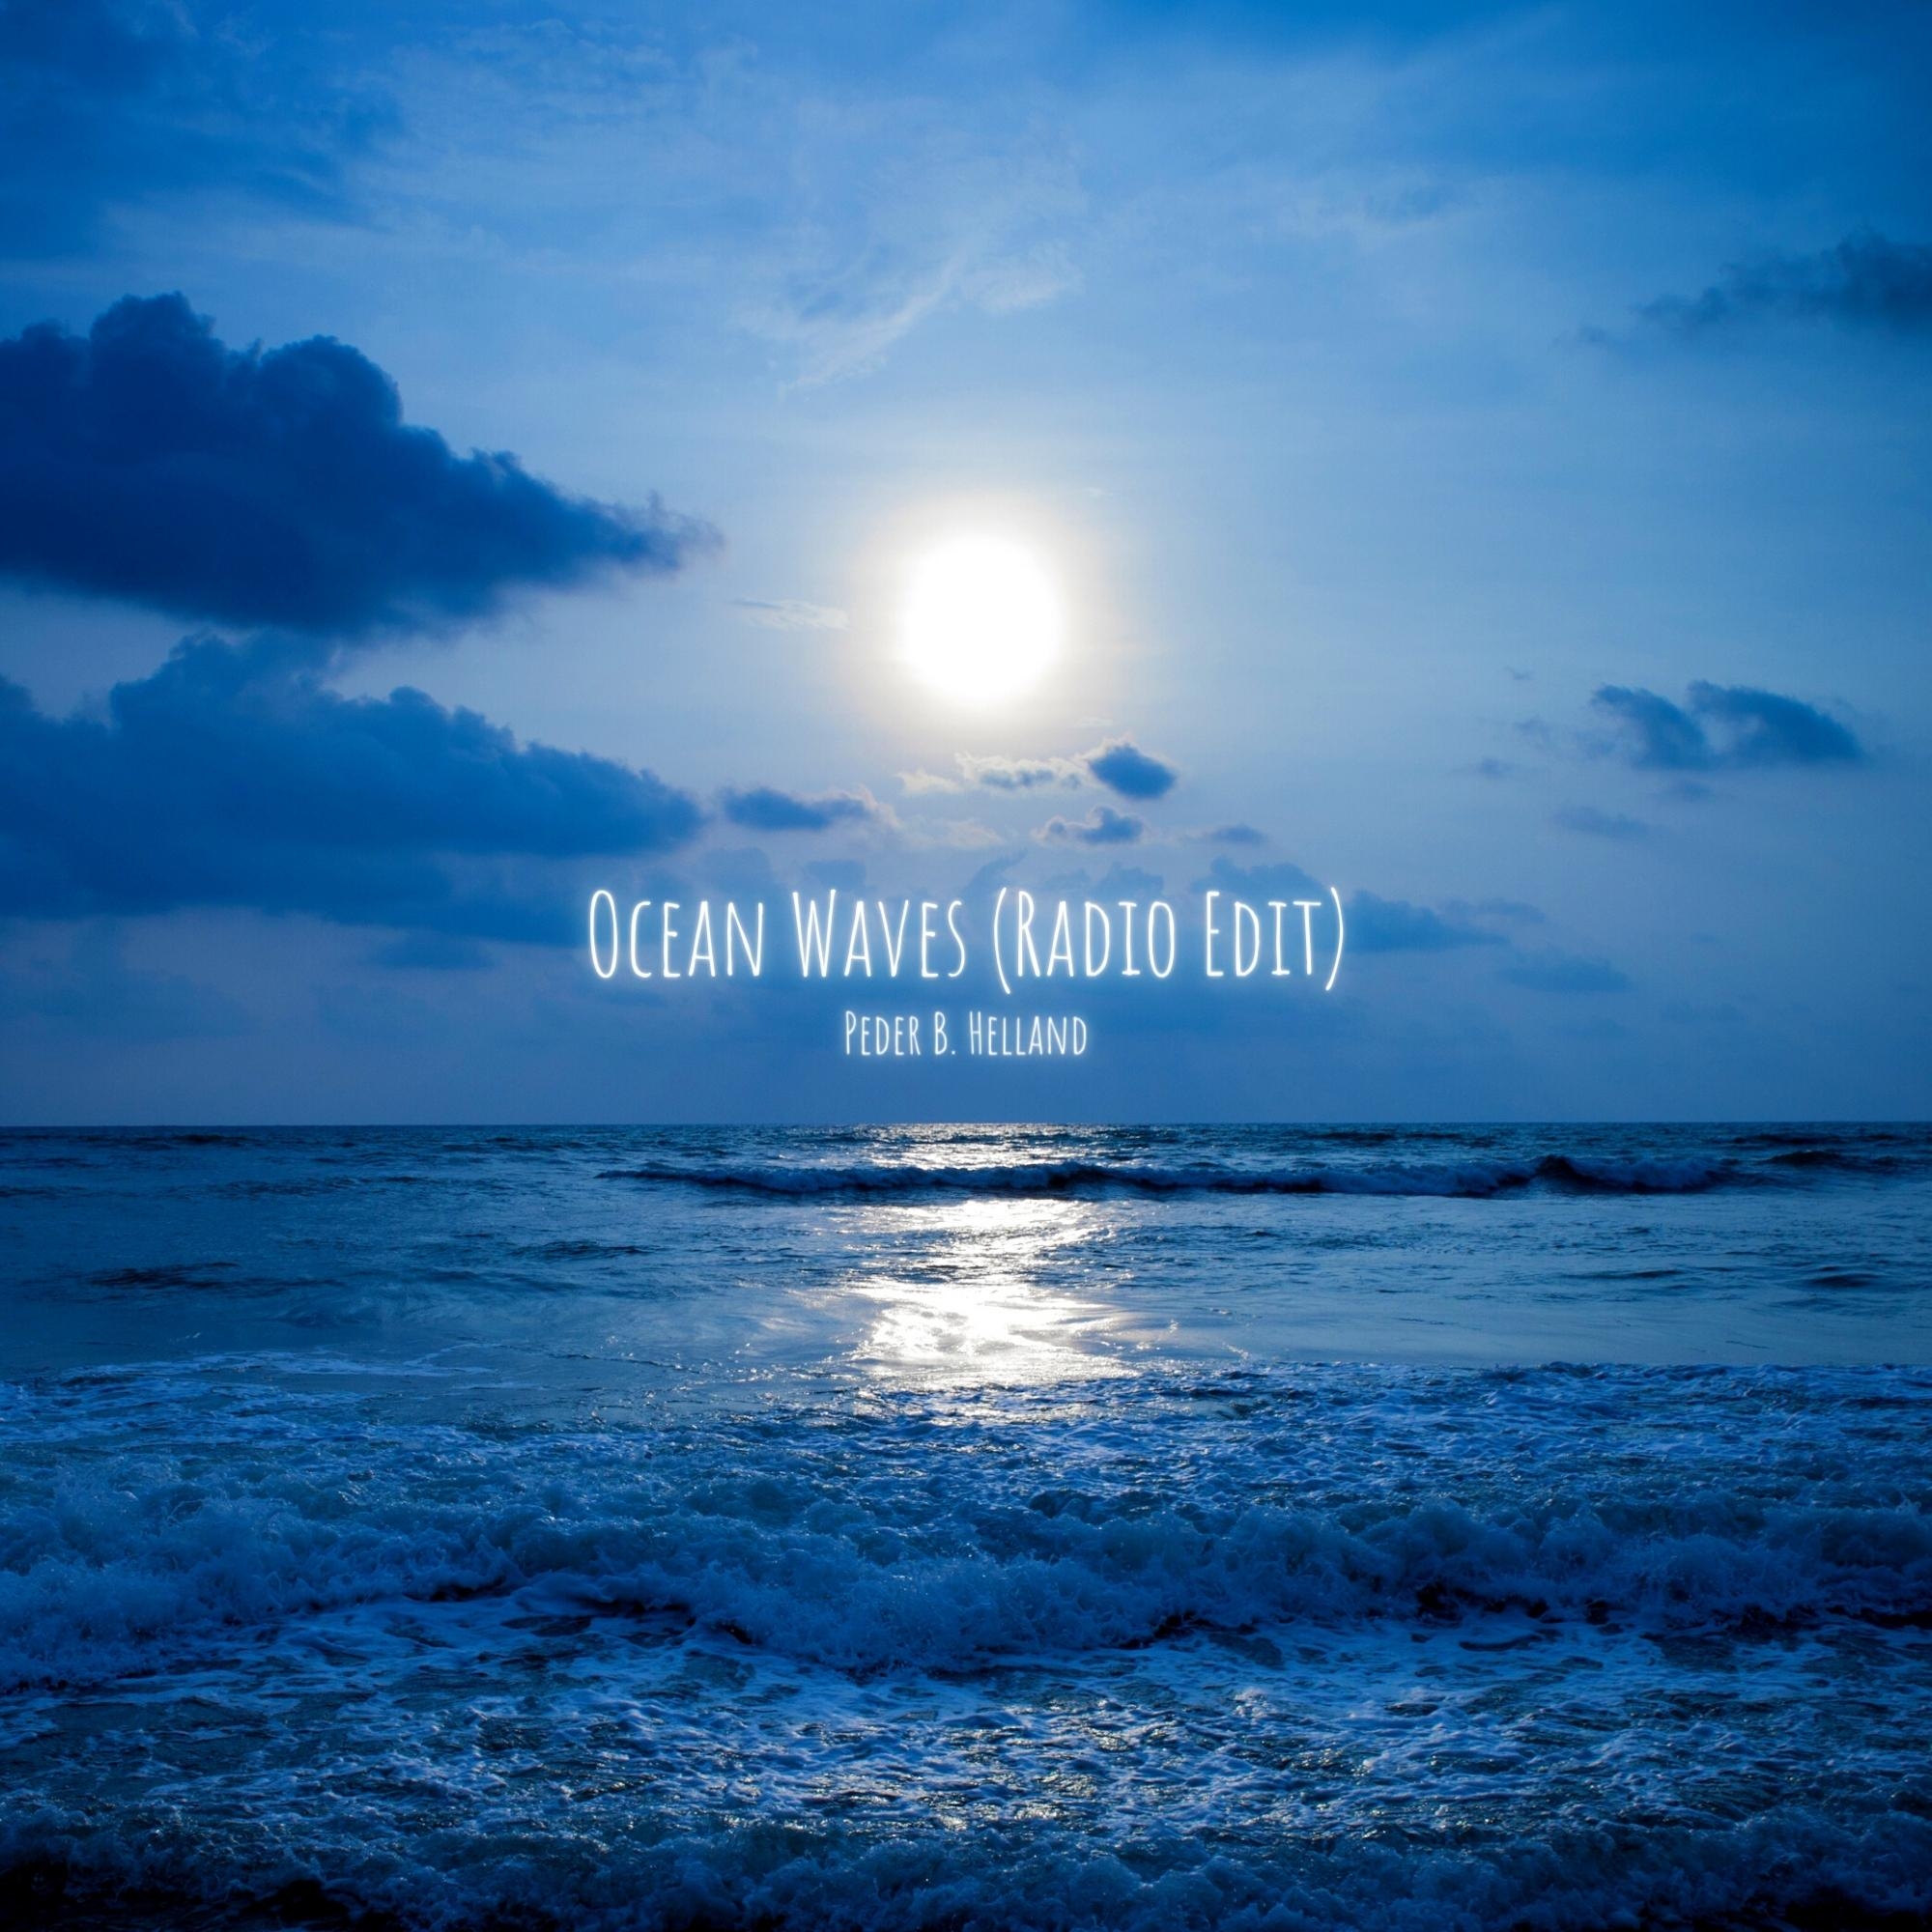 Cover art for the single Ocean Waves (Radio Edit) by Peder B. Helland